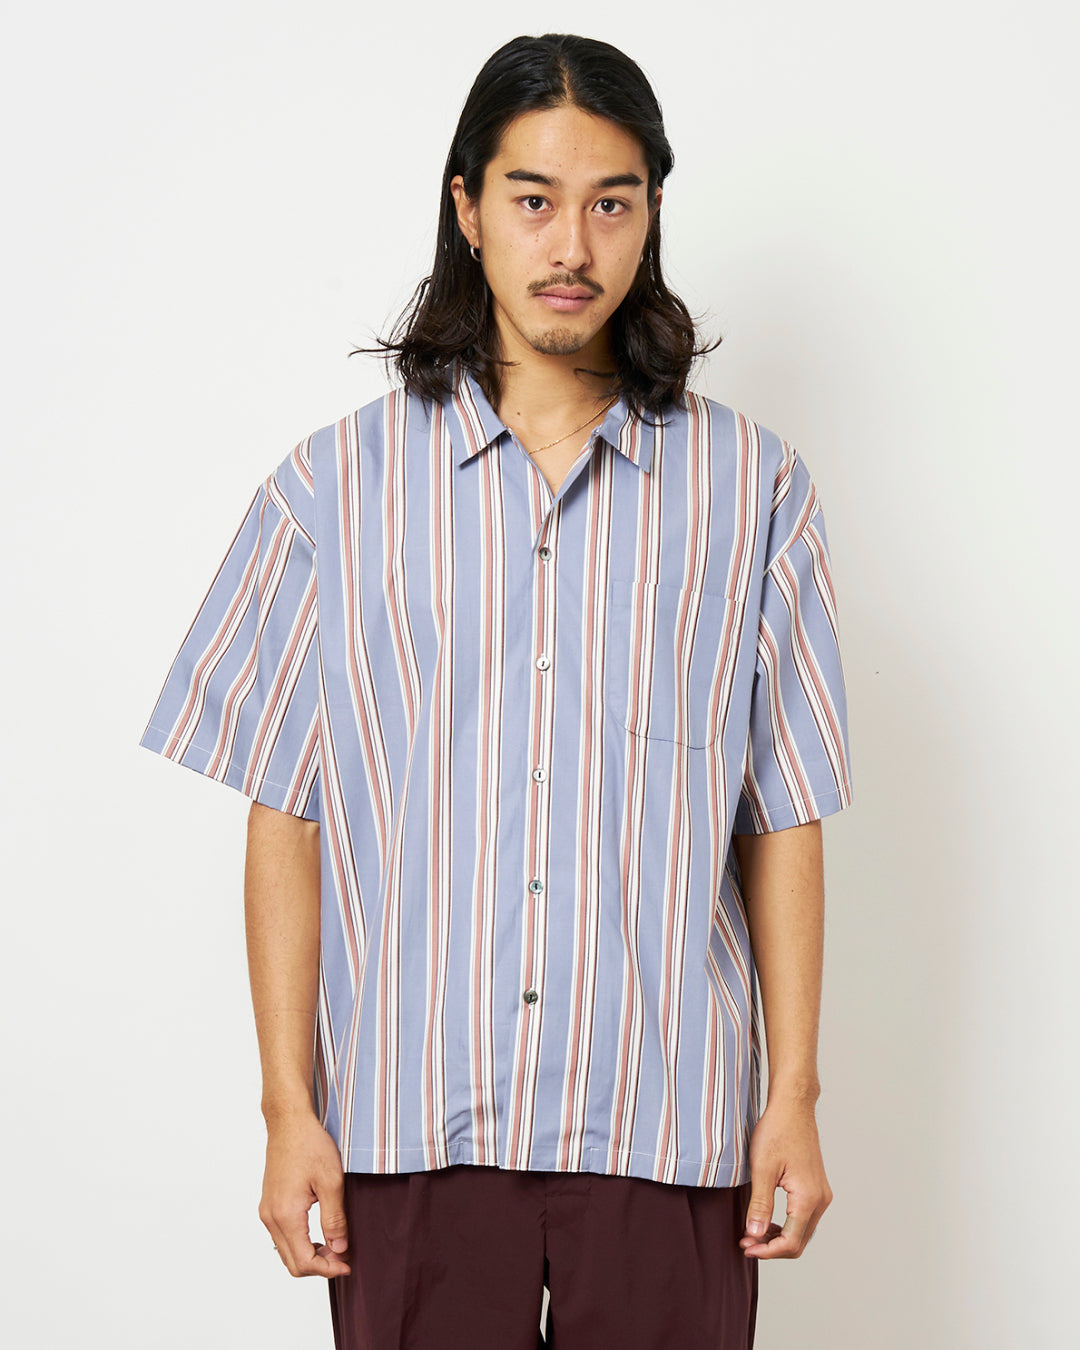 SON OF THE CHEESE 19ss STRIPES SHIRT 大名